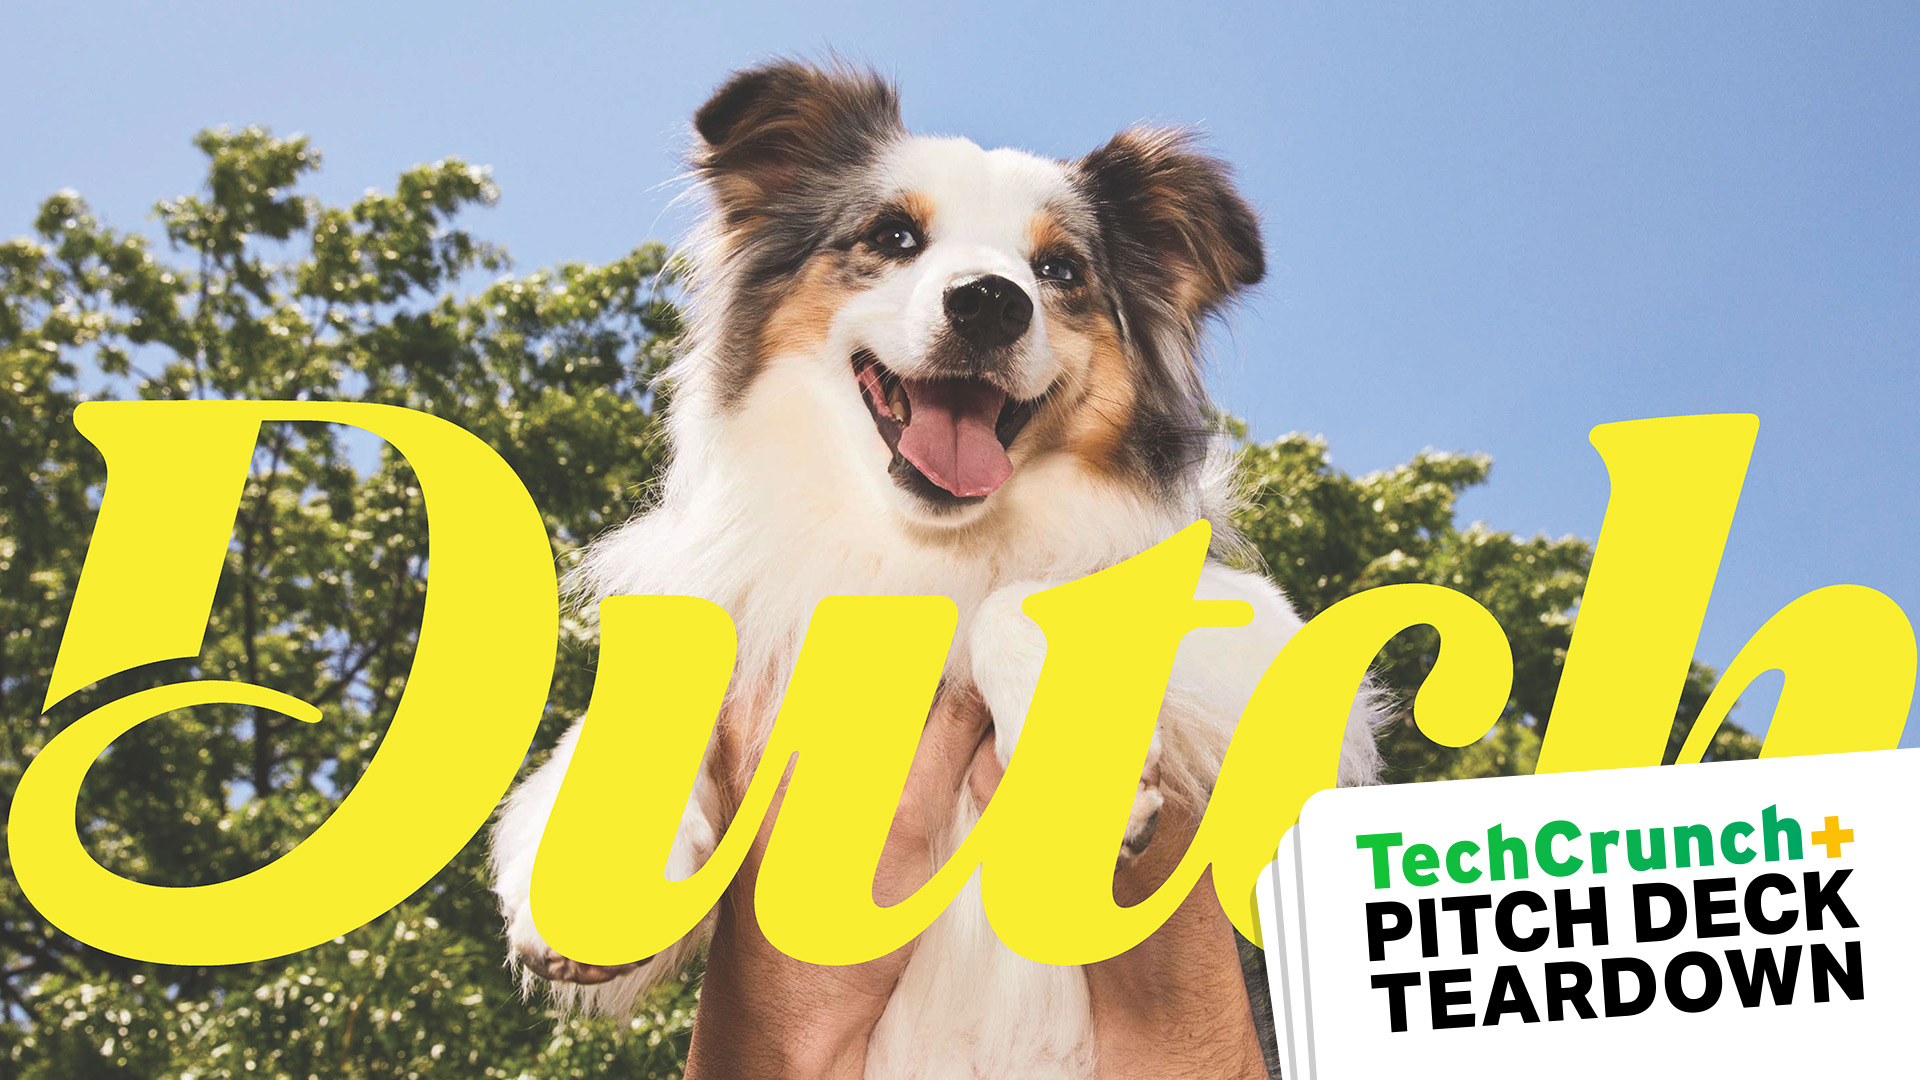 Pitch deck slide with a cute dog, from DUTCH and TechCrunch Pitch Deck Teardown overlay